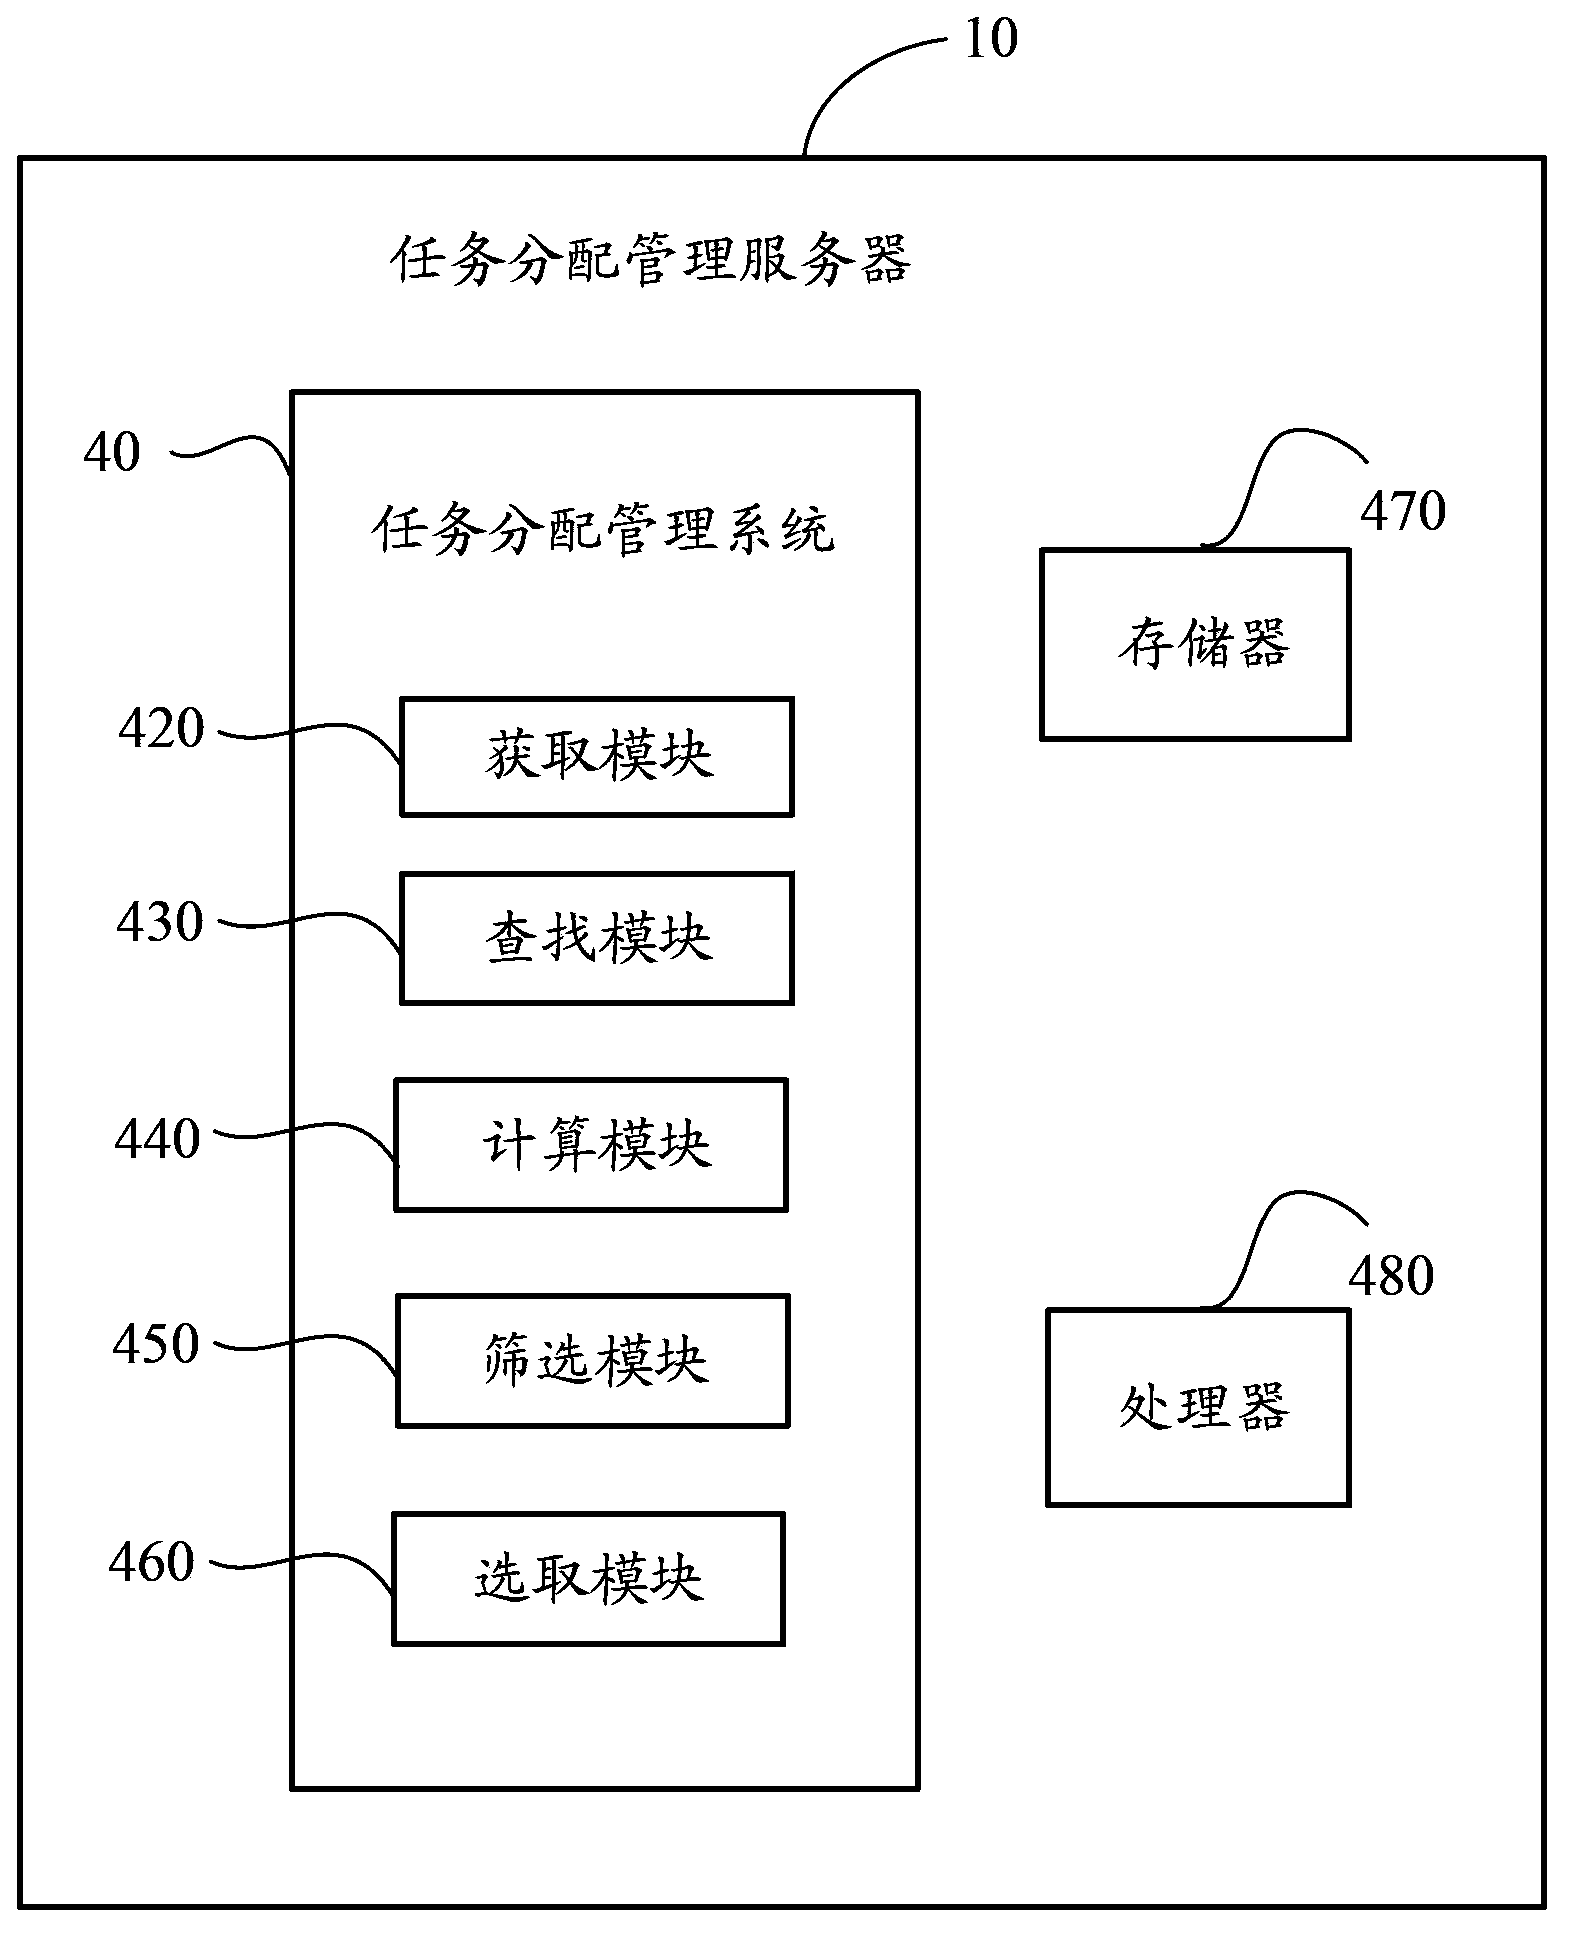 Task allocation management system and method